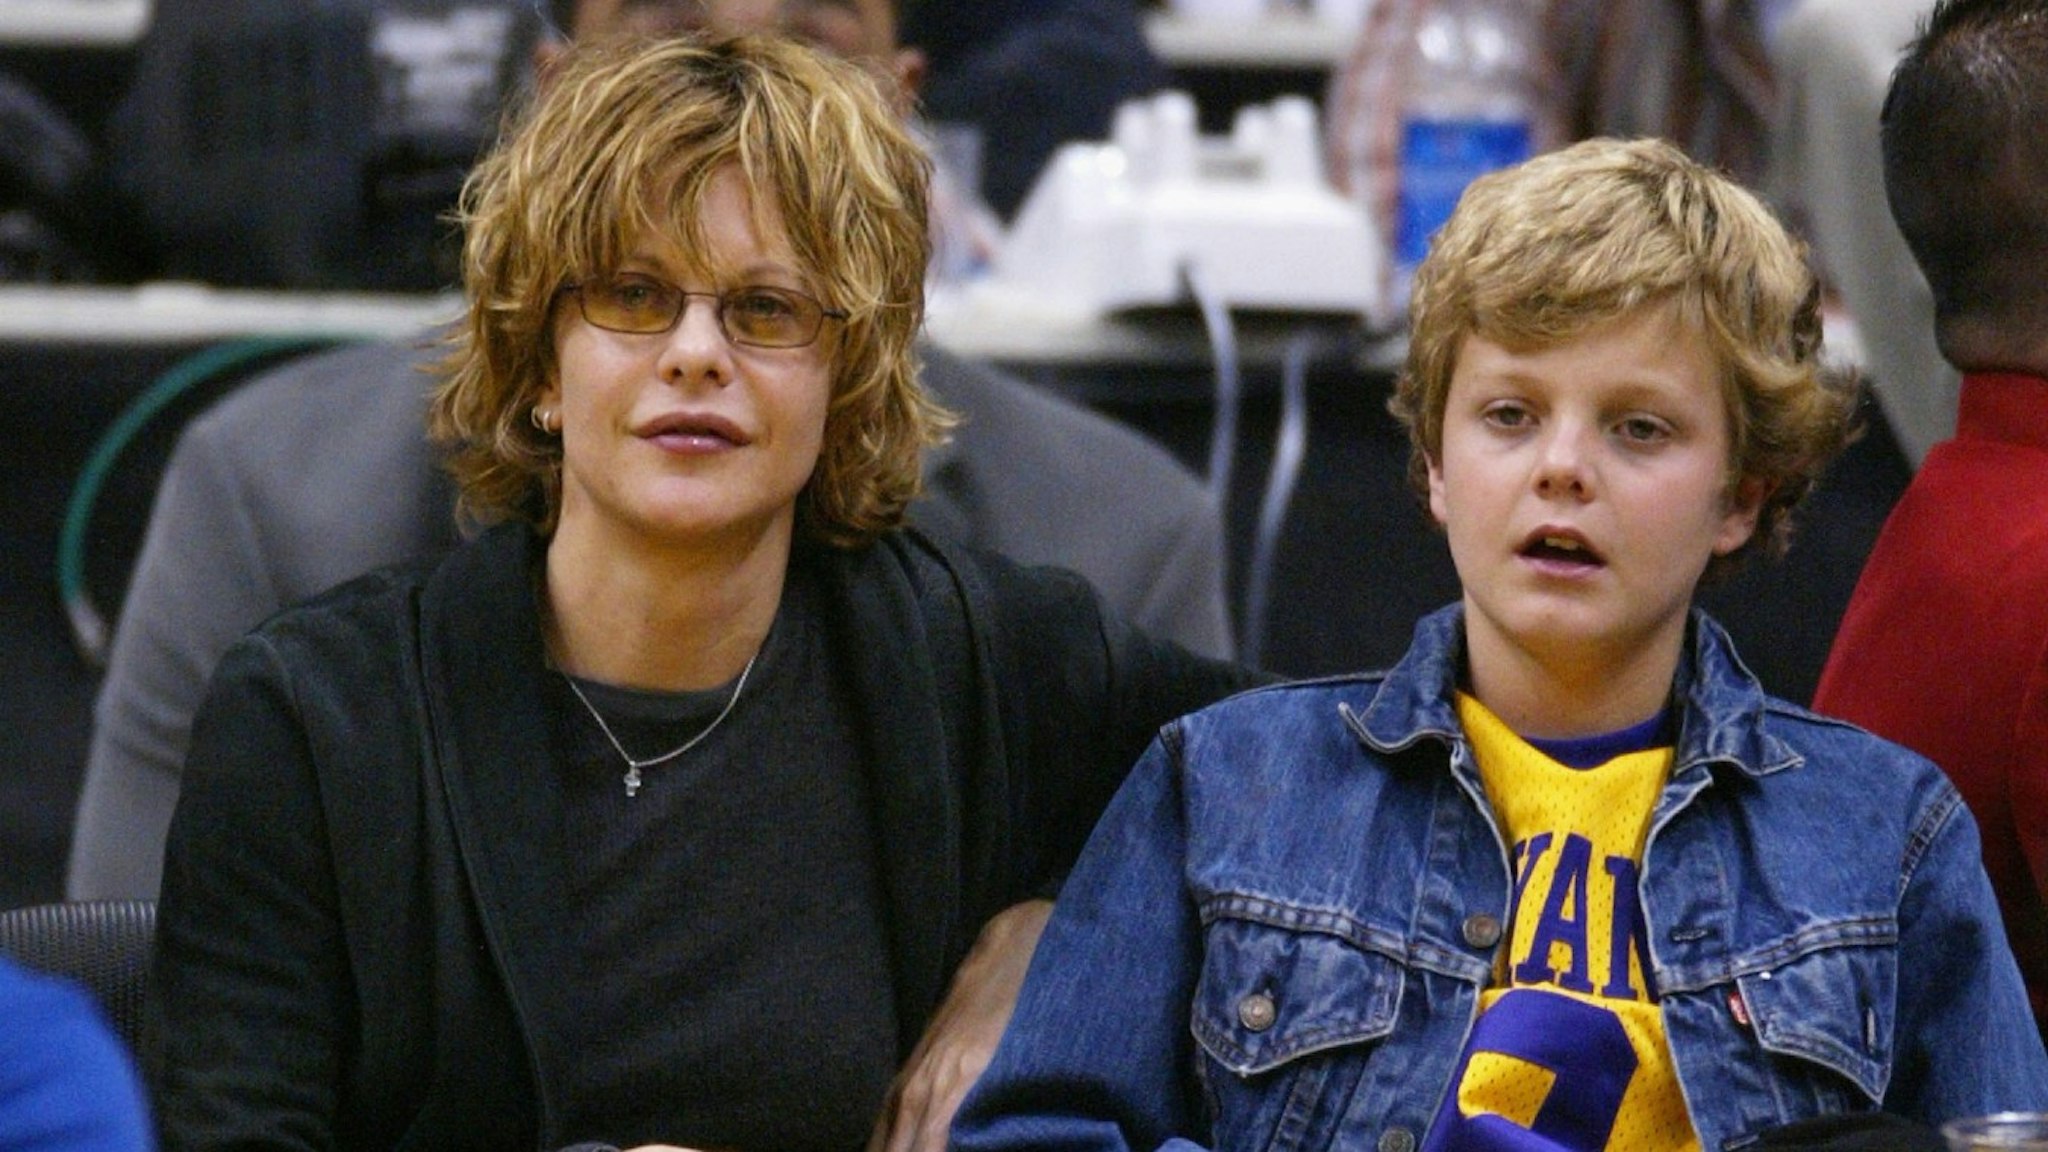 Actress Meg Ryan and son Jack Quaid attend the game between the Los Angeles Lakers and the Portland Trailblazers on April 6, 2004 in Los Angeles, California.